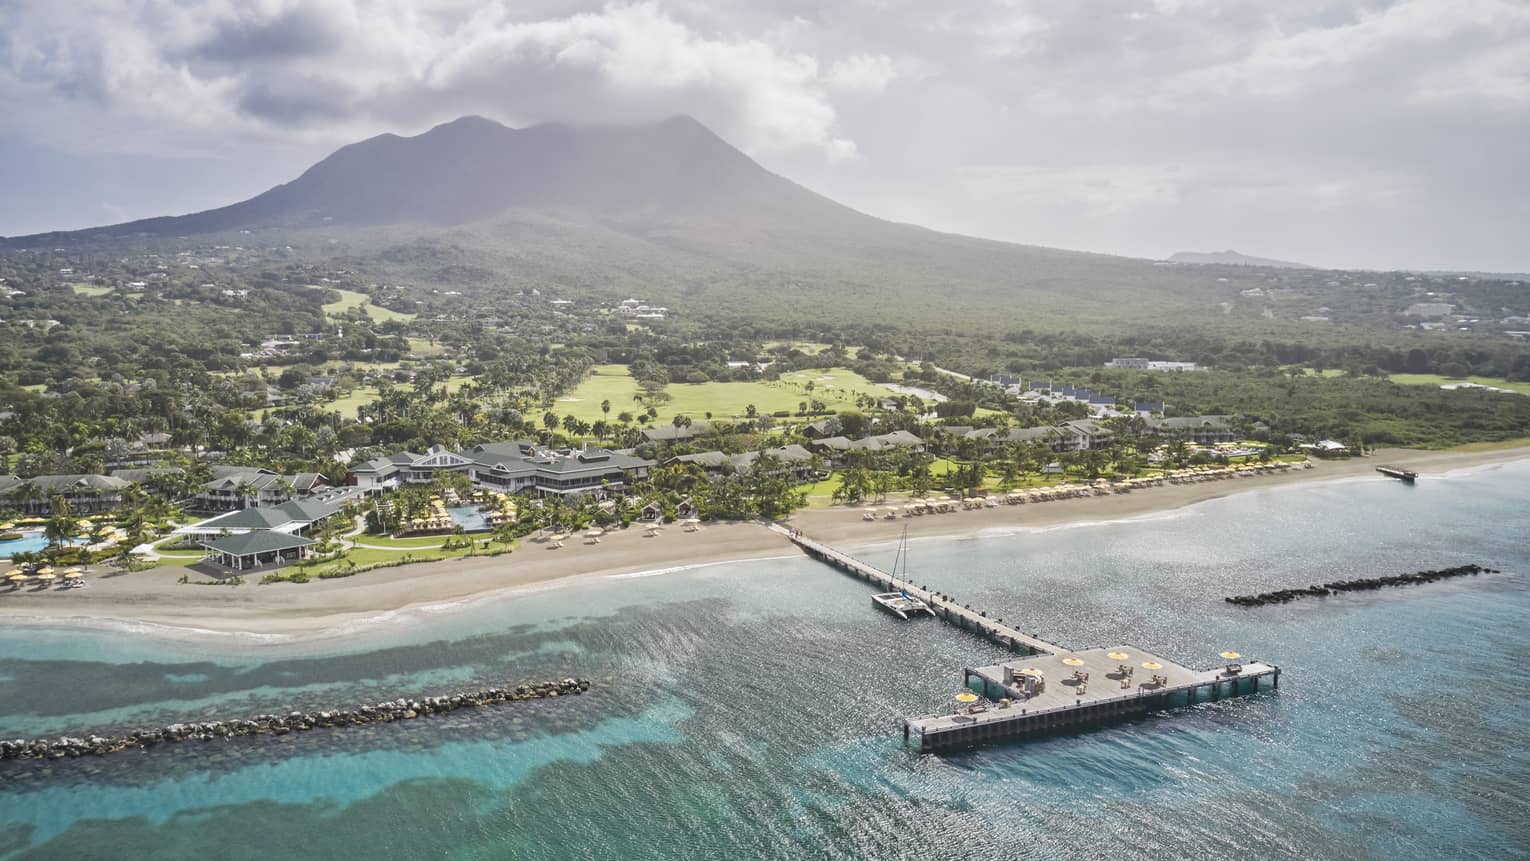 Aerial view of a resort property and dock on a beach shore with a mountain in the distance.